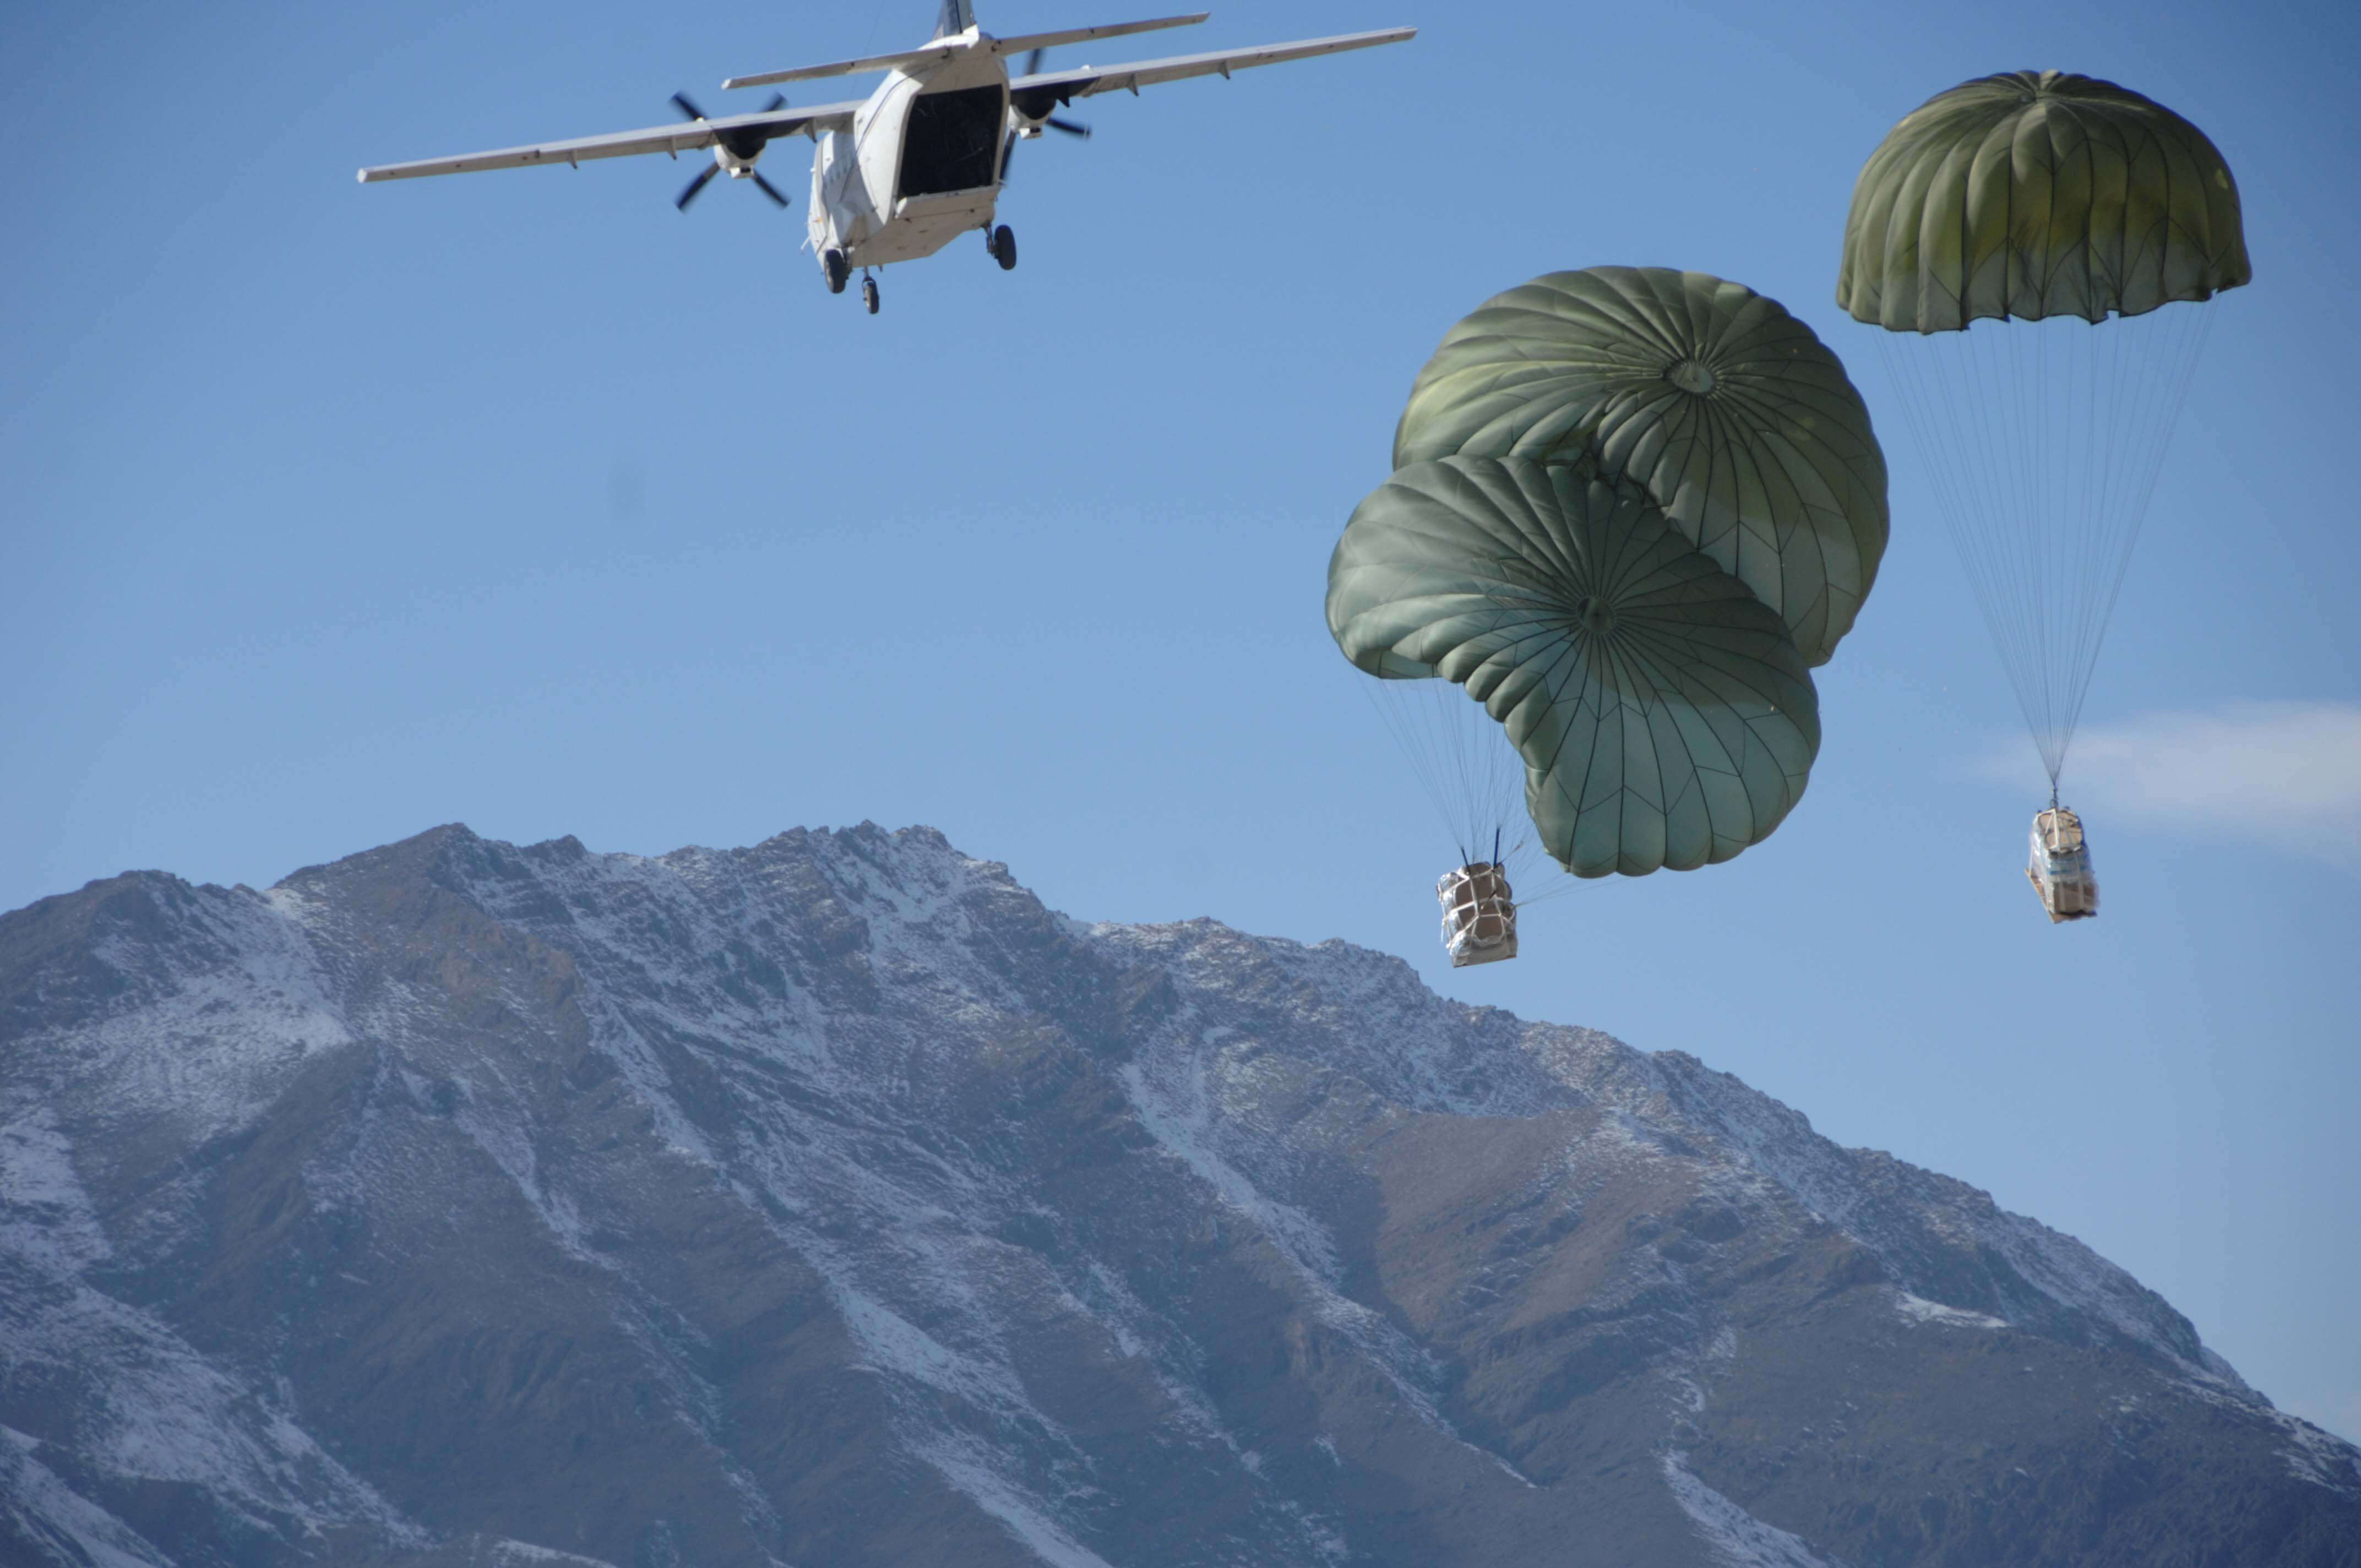 Joachim - Blackwater cargo aircraft over Afghanistan dropping supplies to U.S. Army soldiers in 2007. Wikimediacommons